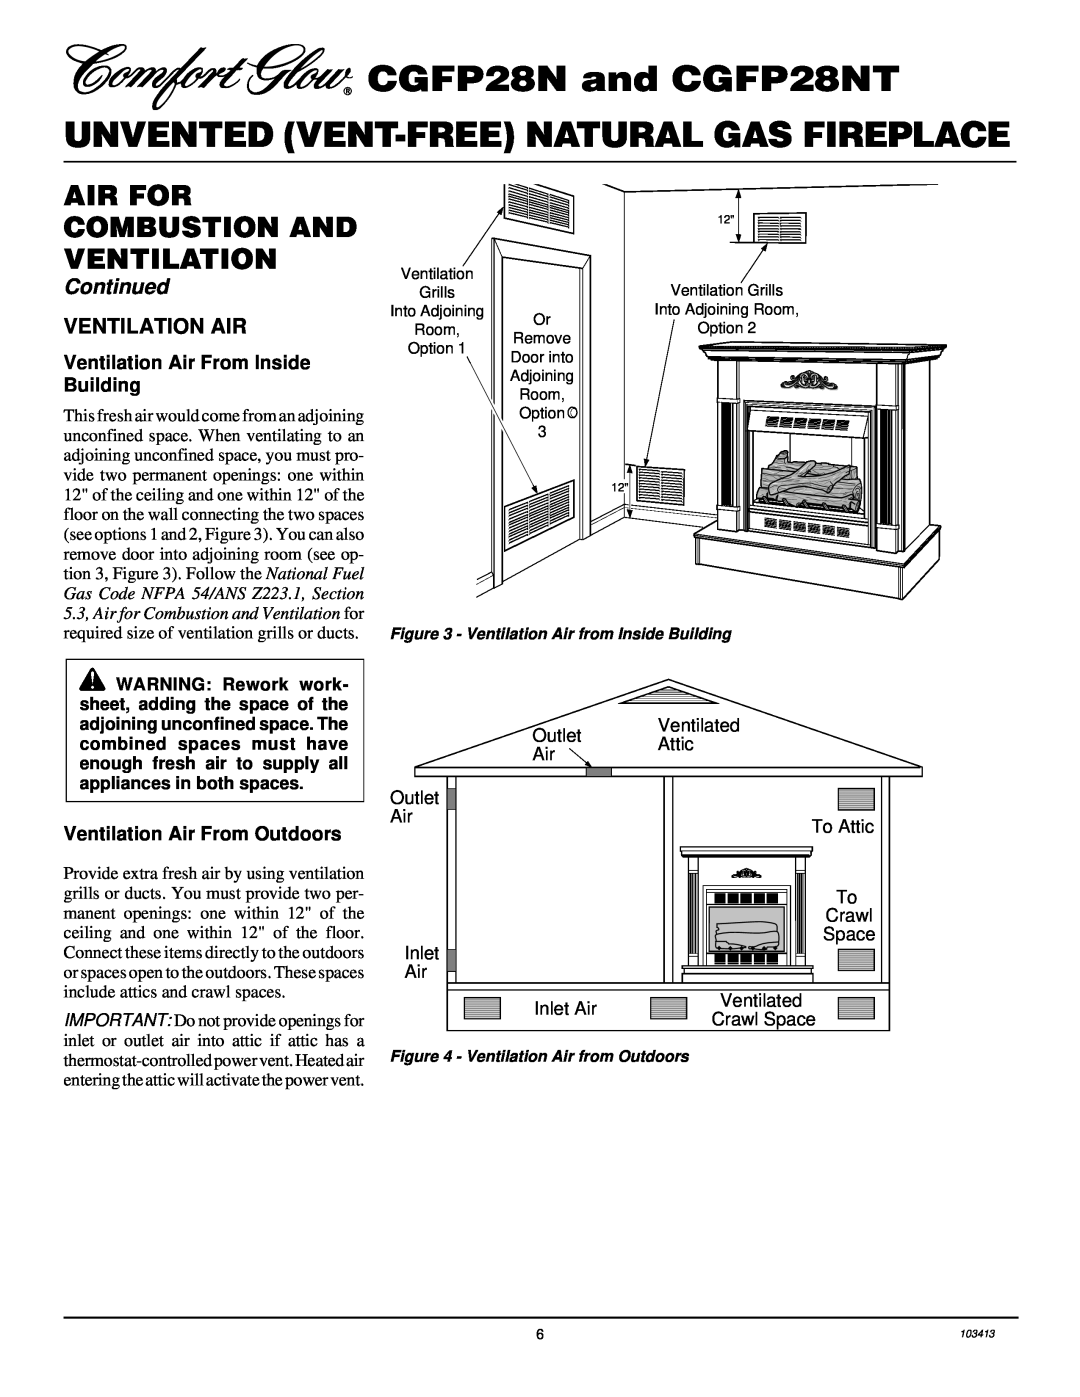 Desa CGFP28N Ventilation Air From Inside Building, Ventilation Air From Outdoors, To Attic, Ventilated, Continued 